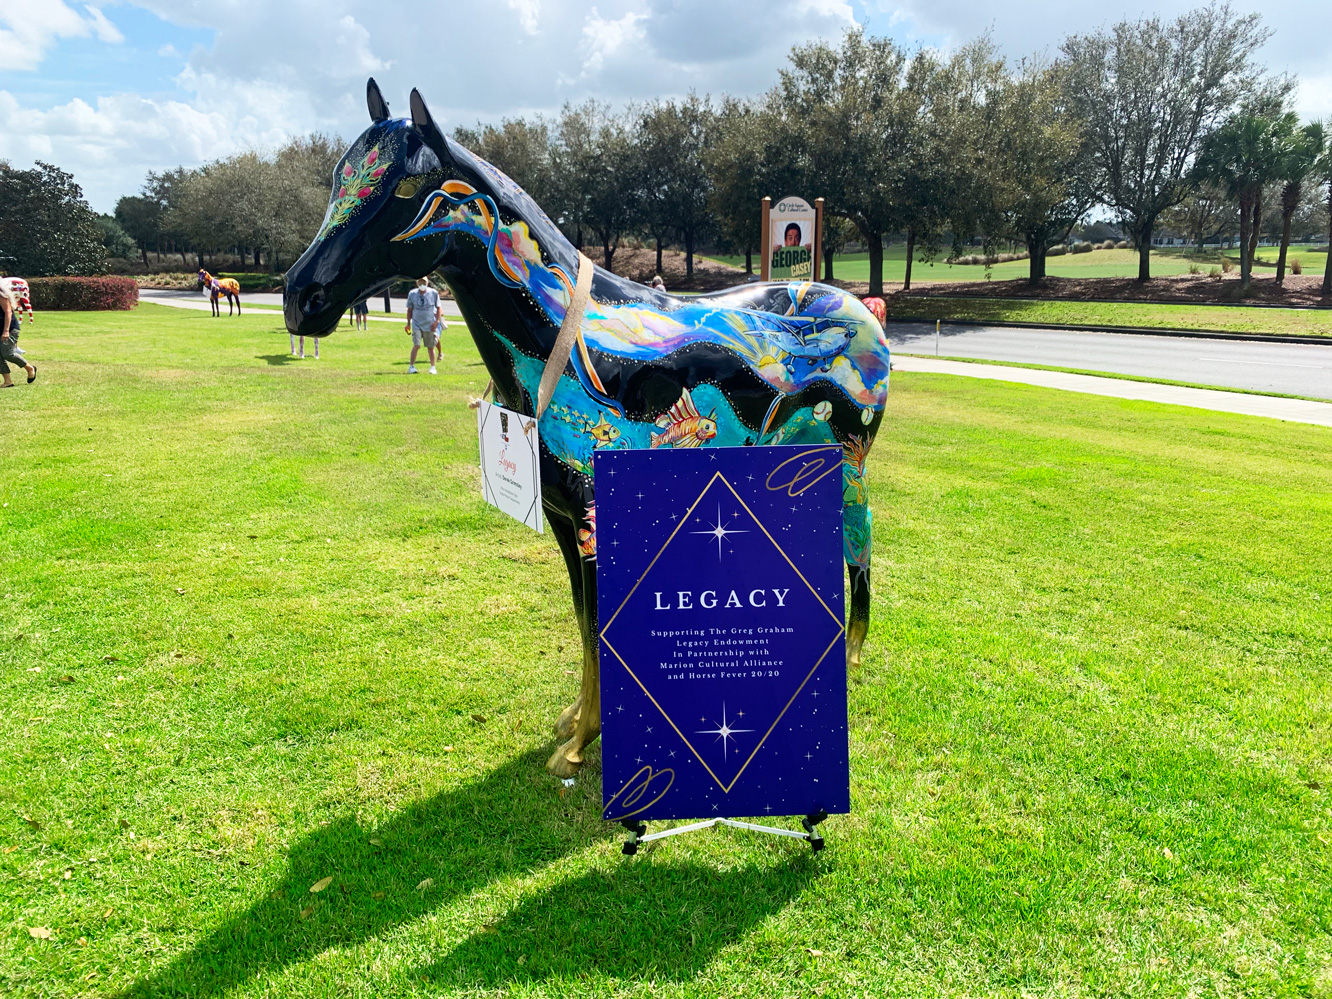 Legacy- One of the Horse Fever horses.